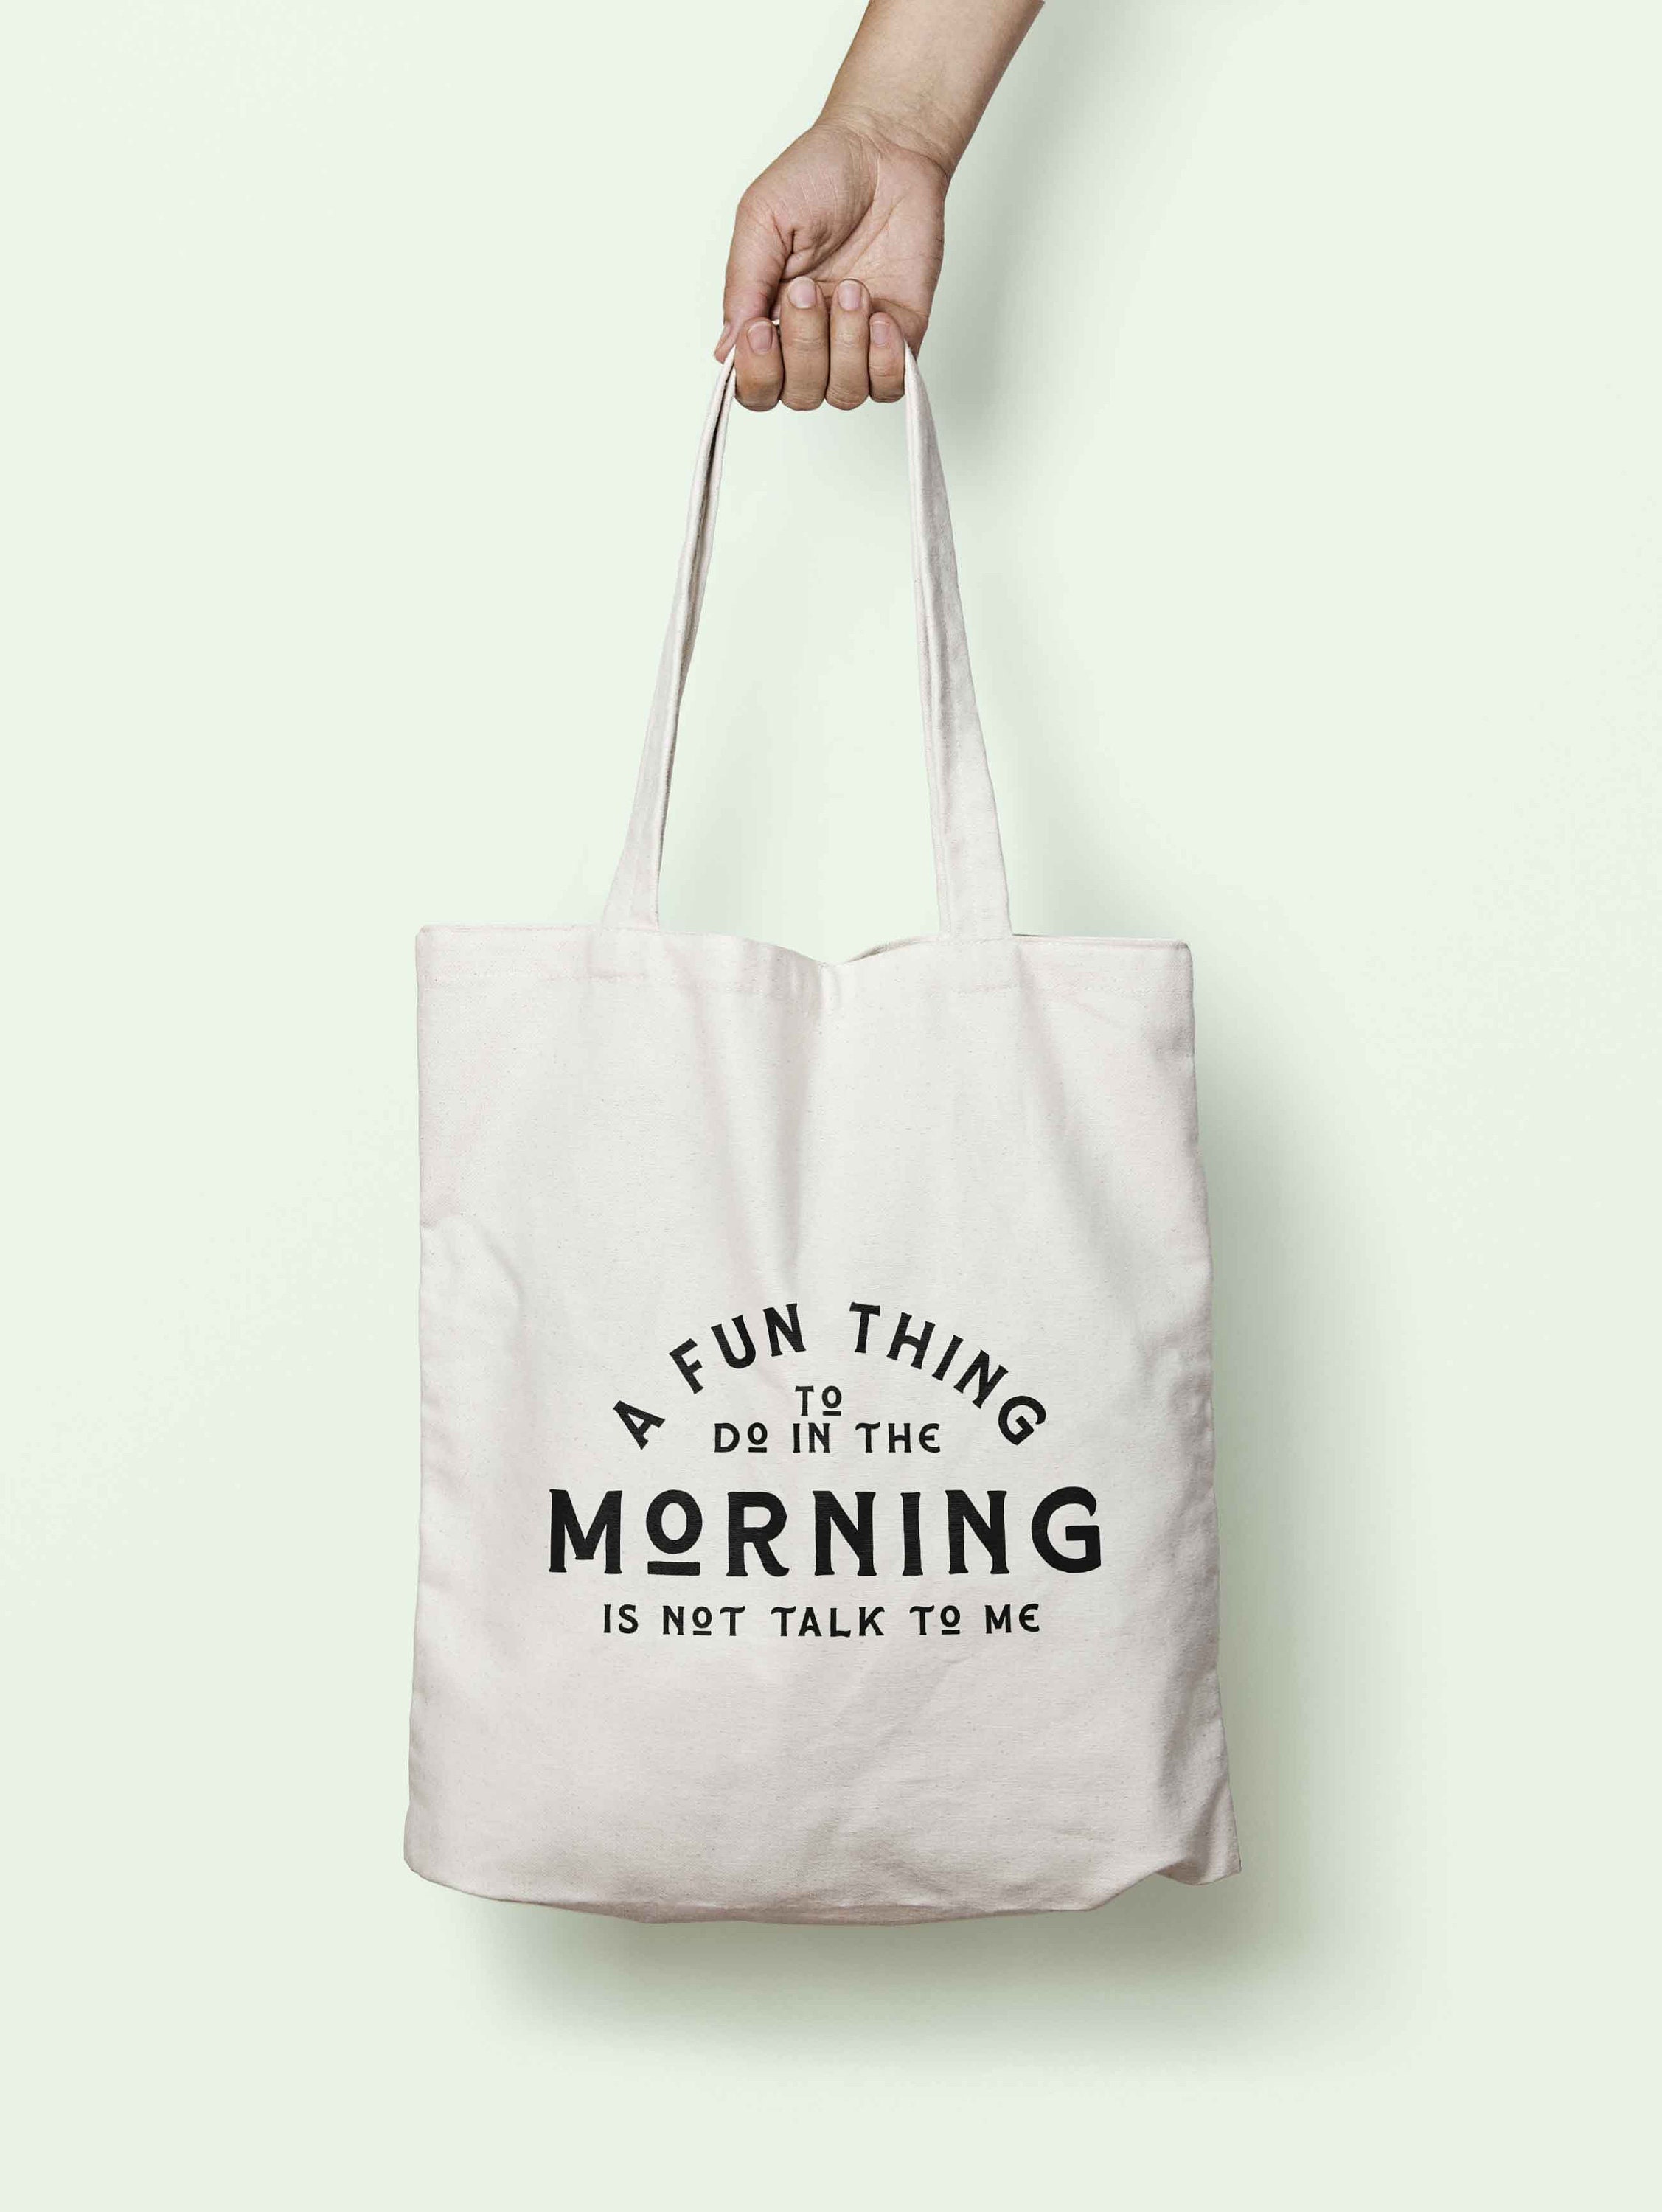 Op en neer gaan Afsnijden Bestuiver A Fun Thing to Do in the Morning is Not Talk to Me Tote Bag - Etsy